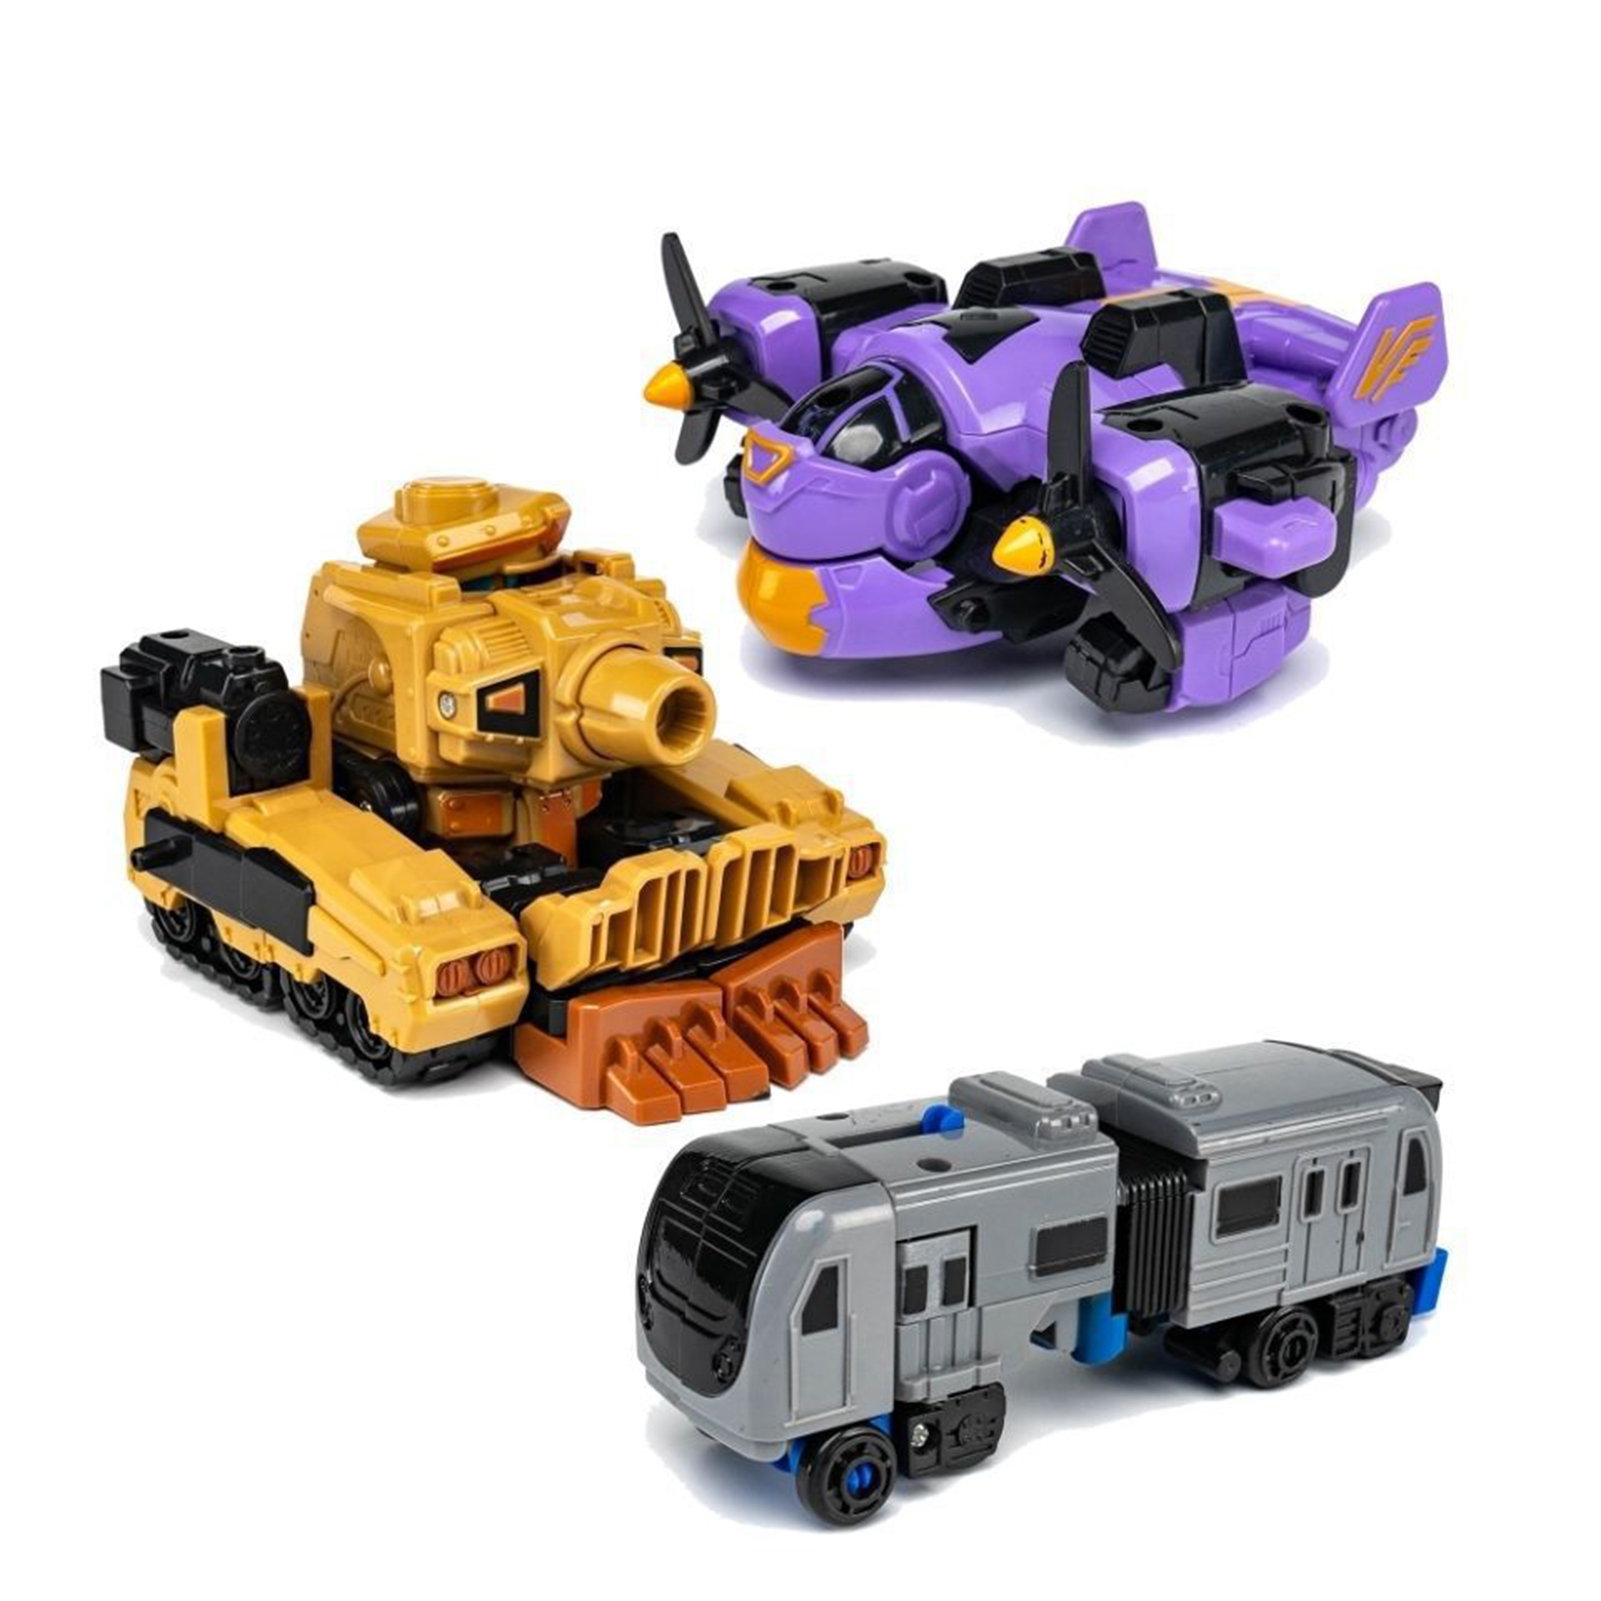 Biplut Transform Car Robot Vehicles Toy Robot Transformer Toy Various Style Aircraft Tractor Tank Train Cartoon Model Toy Collectible -15cm Robot Transforming for Children Birthday Gift (Light Yellow) - image 4 of 13